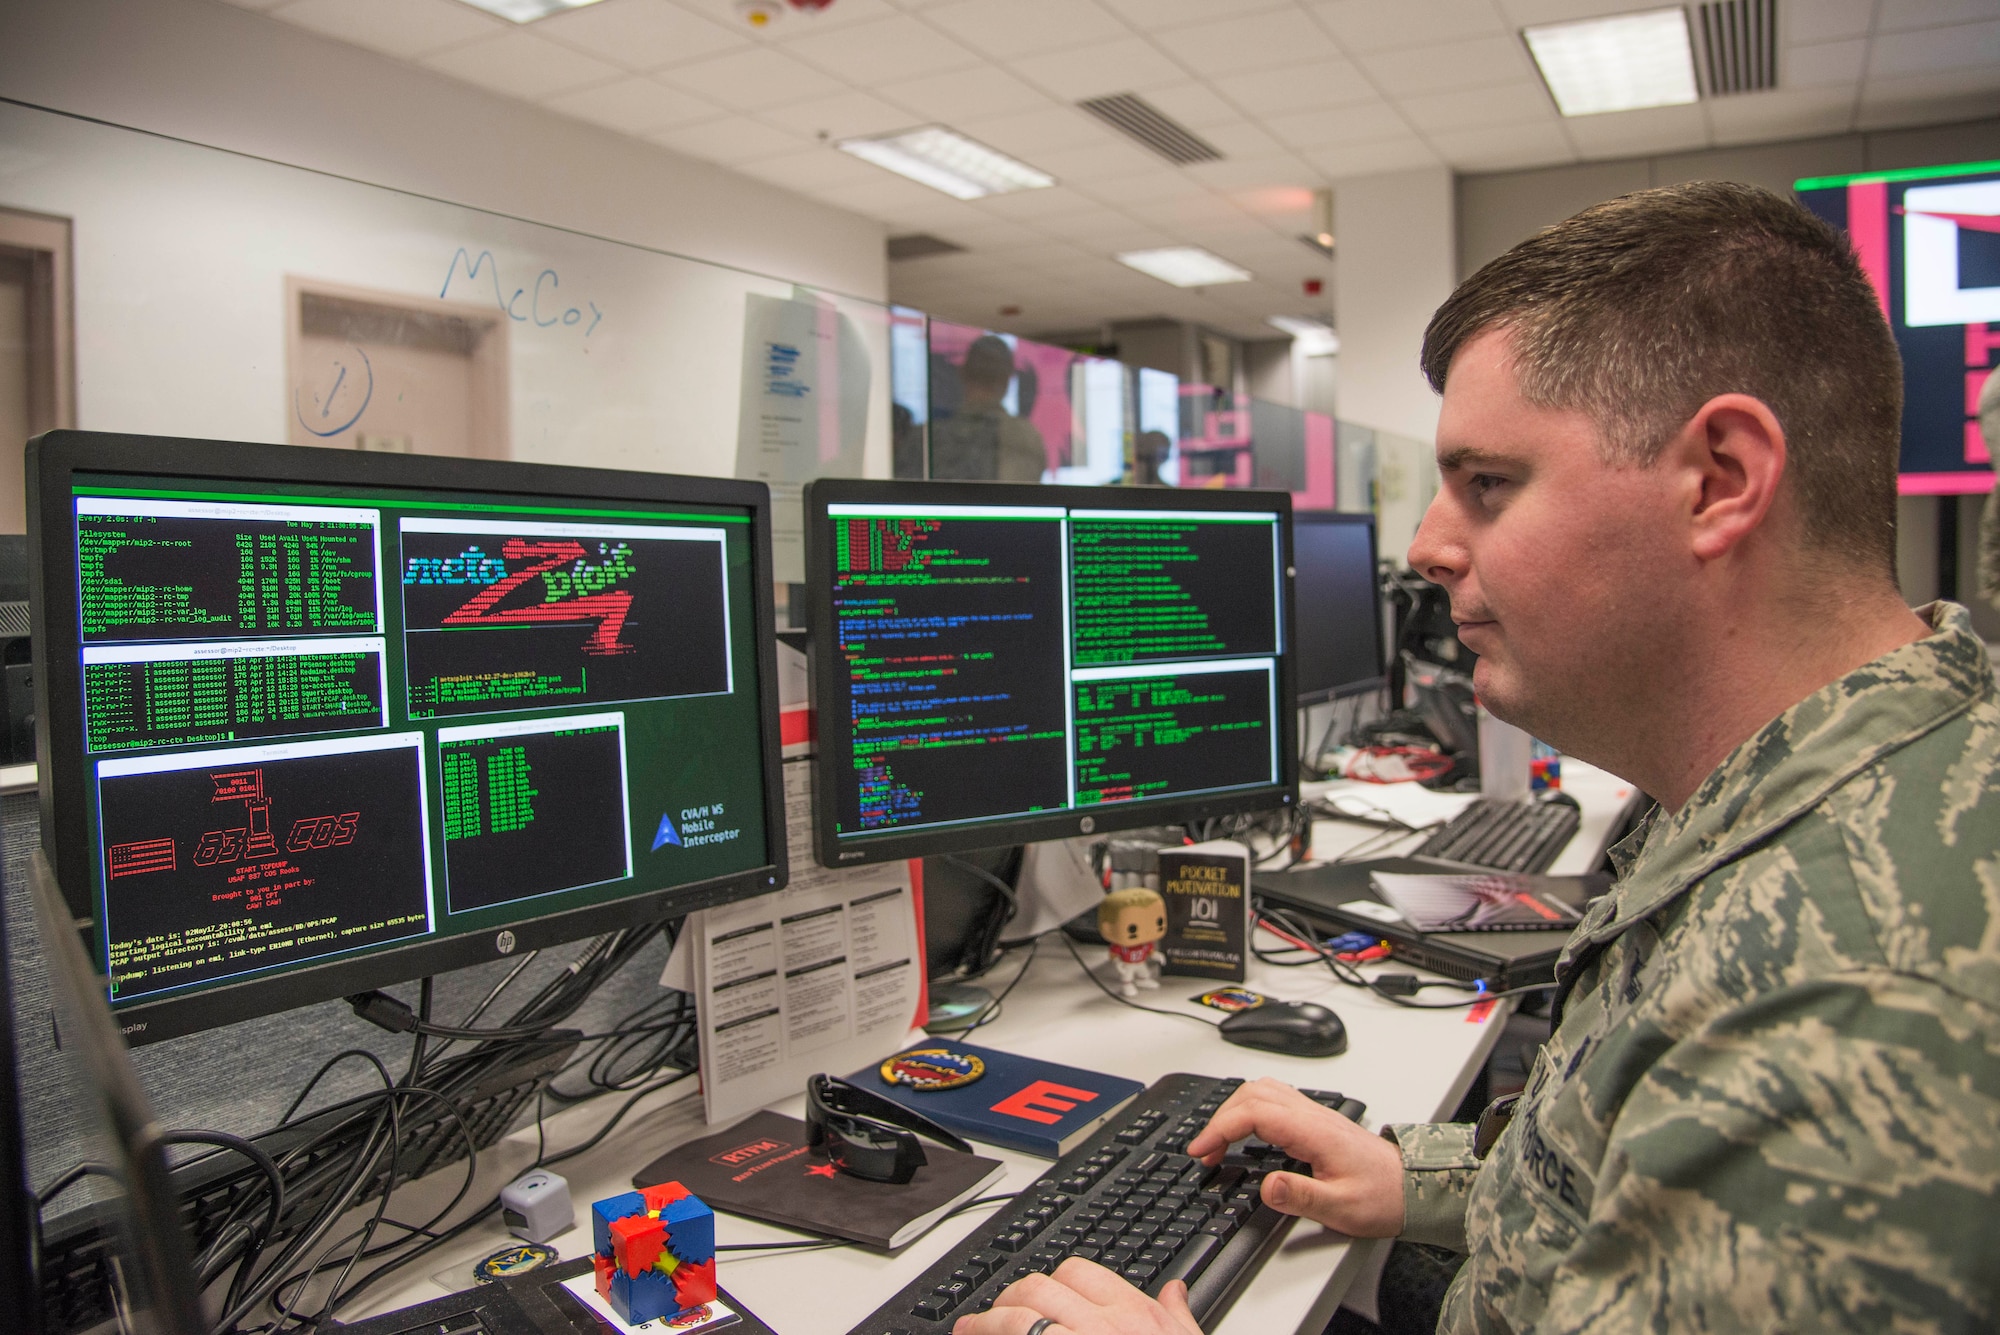 A member of a Cyber Protection Team participates in the Air Force's Exercise Black Demon, designed to validate his ability to protect and defend specific critical missions or assests. Unlike other communications specialists who work to defend and protect an entire network, CPTs have advanced training and skillsets that go deeper into locating and then neutralizing the threats posed to high priority missions. (U.S. Air Force photo by Airman 1st Class Daniel Garcia)